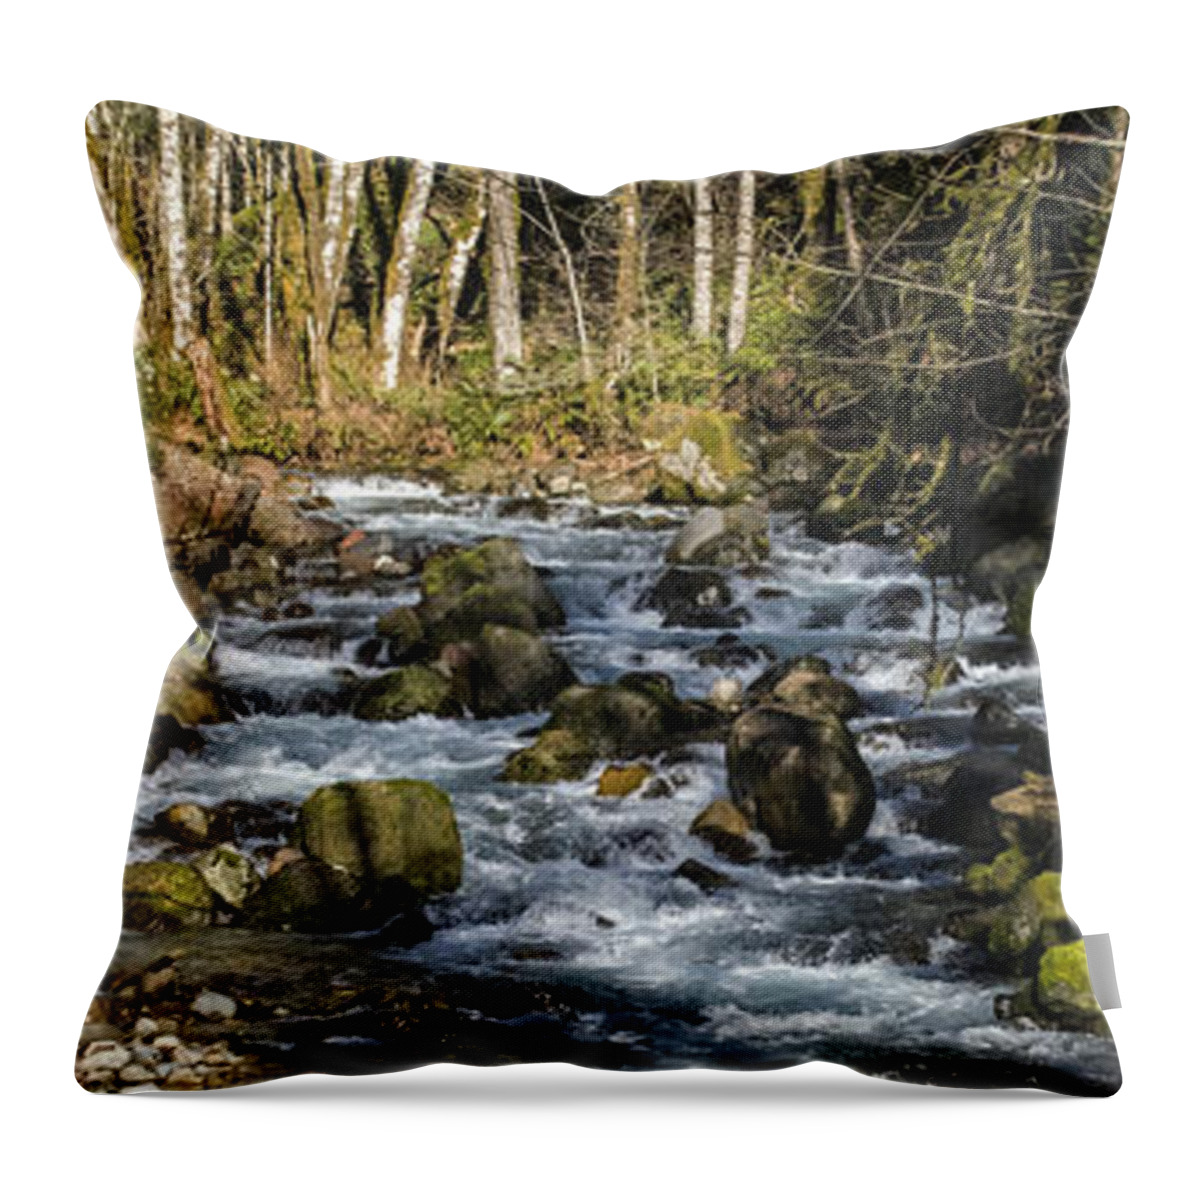 Streams Throw Pillow featuring the photograph Views Of A Stream, II by Chuck Flewelling